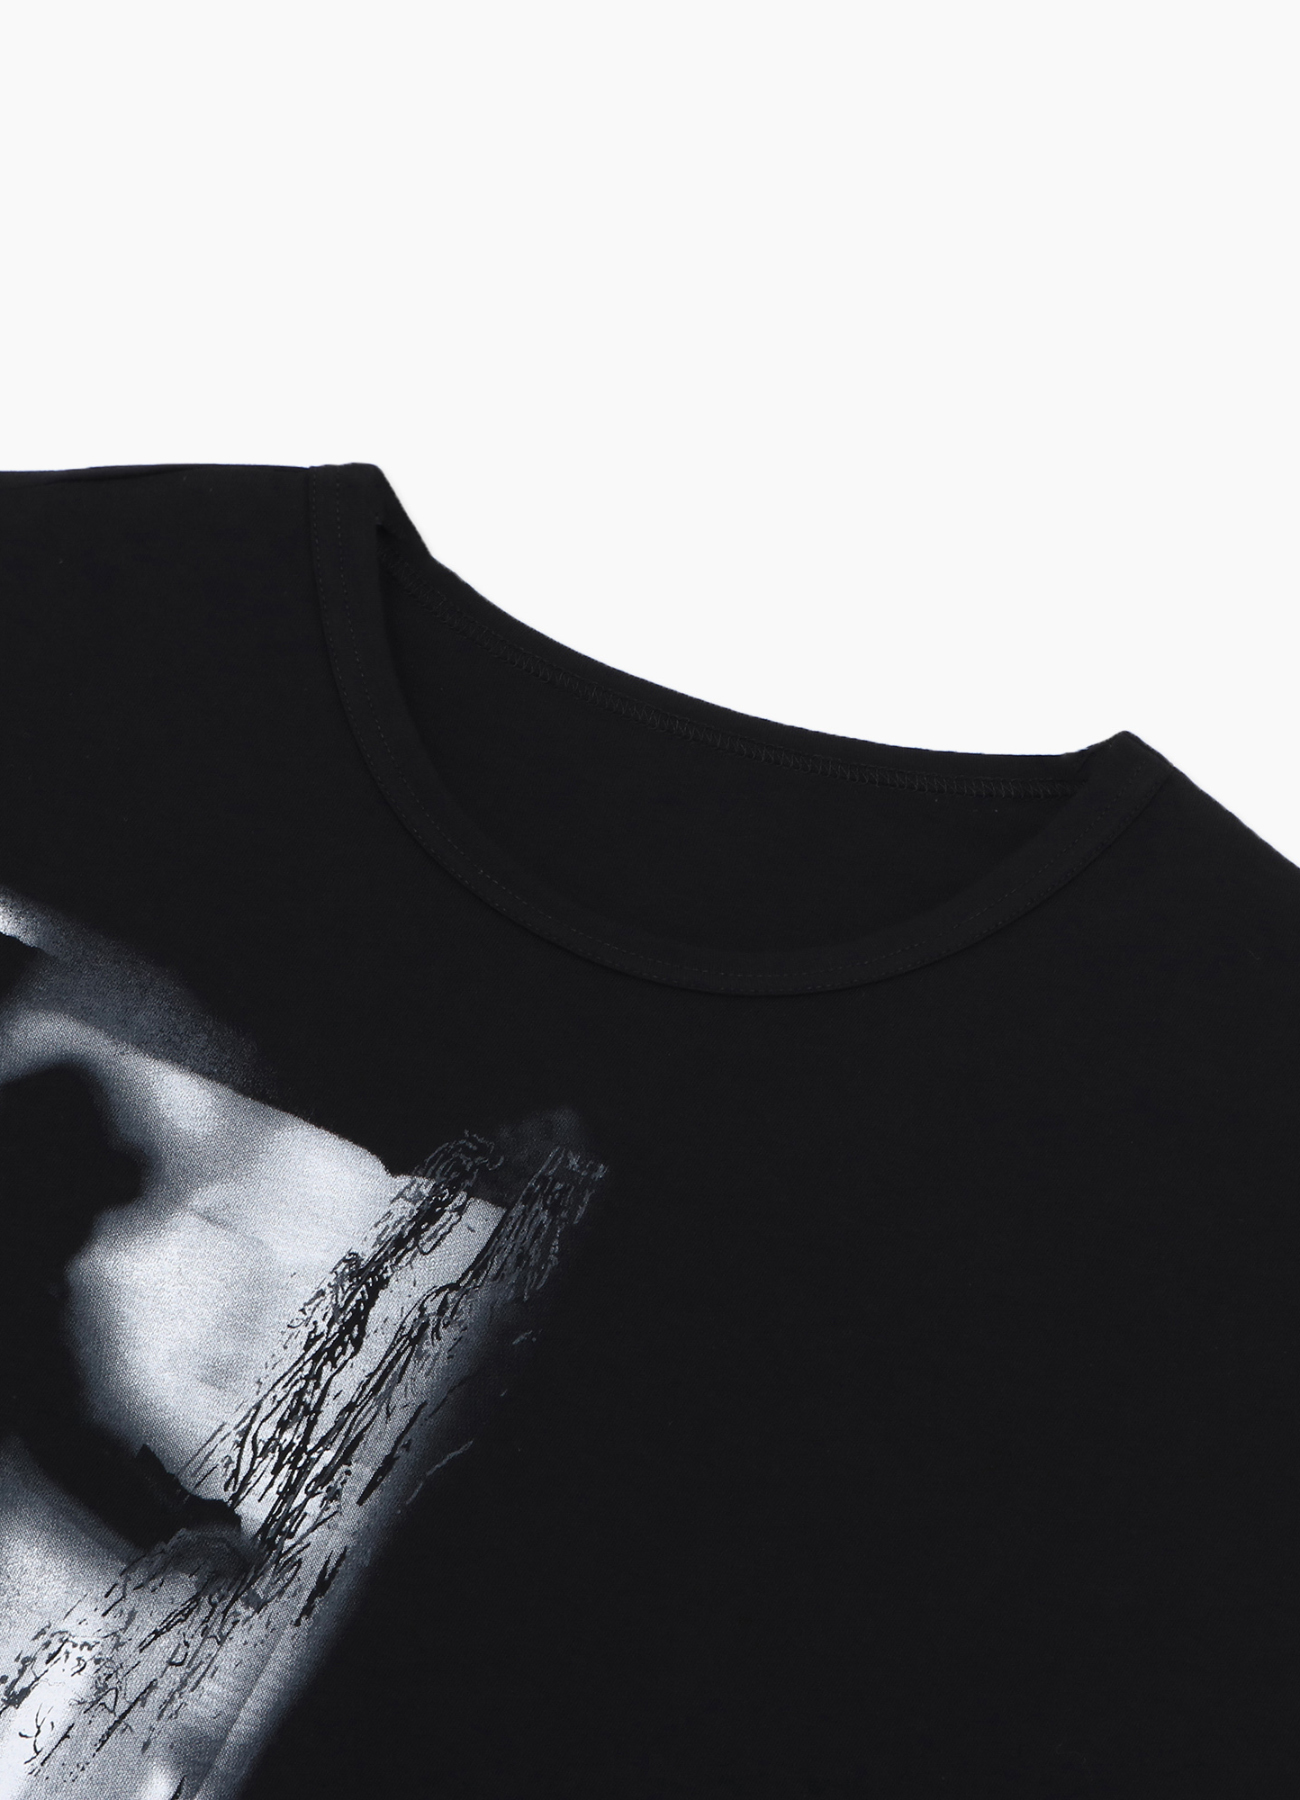 "Shadow" Graphic T-shirt A